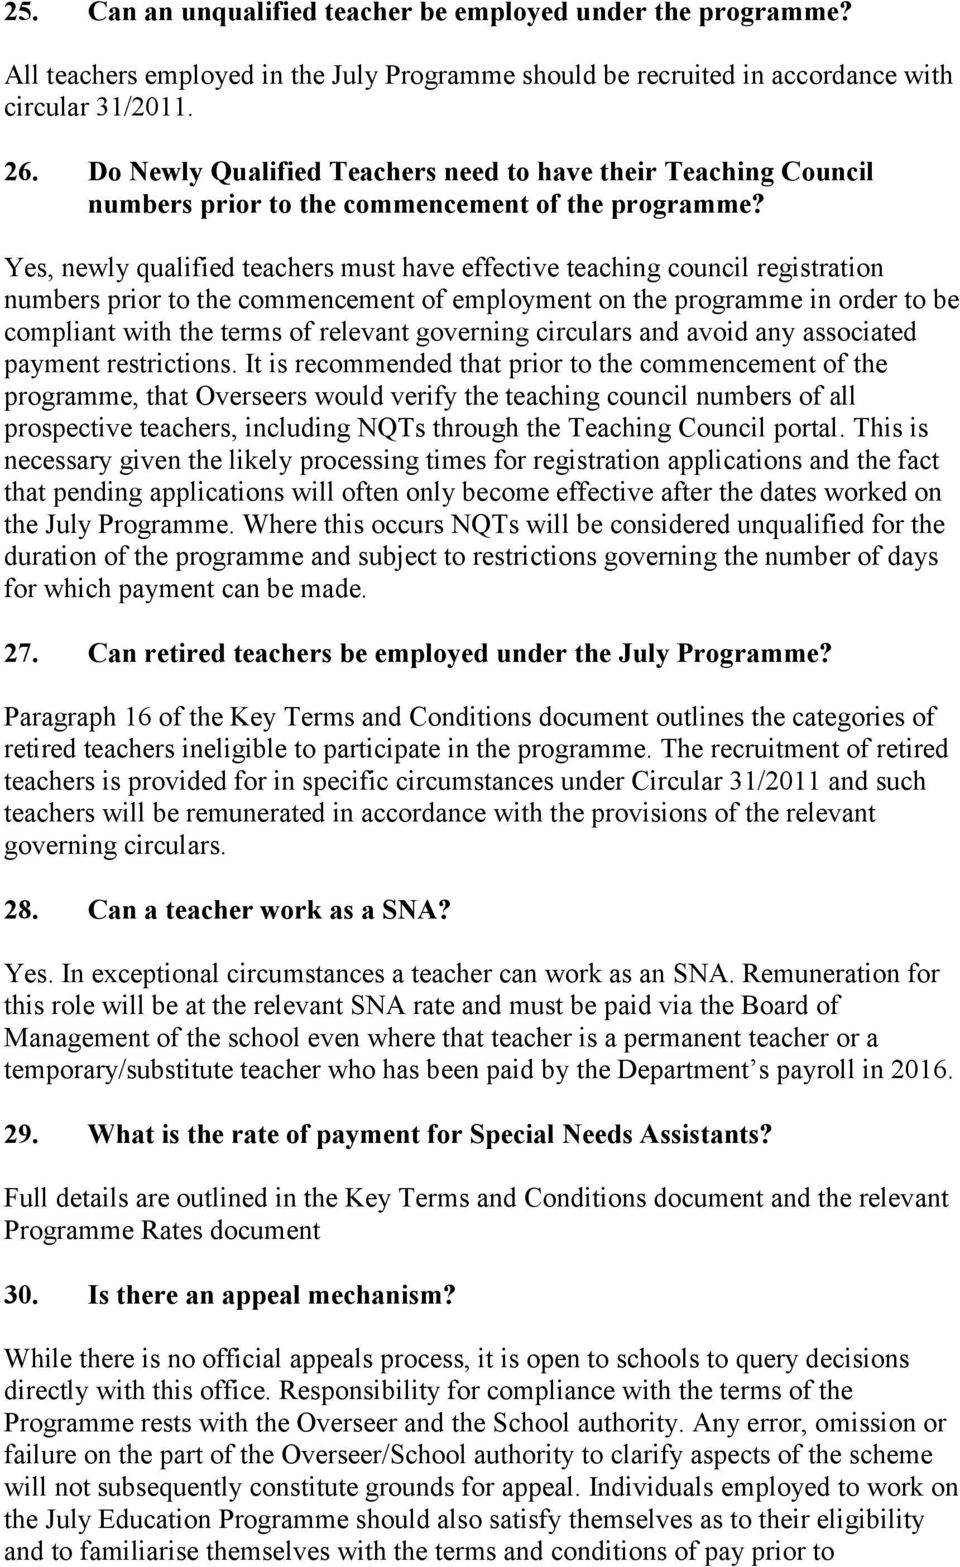 Yes, newly qualified teachers must have effective teaching council registration numbers prior to the commencement of employment on the programme in order to be compliant with the terms of relevant